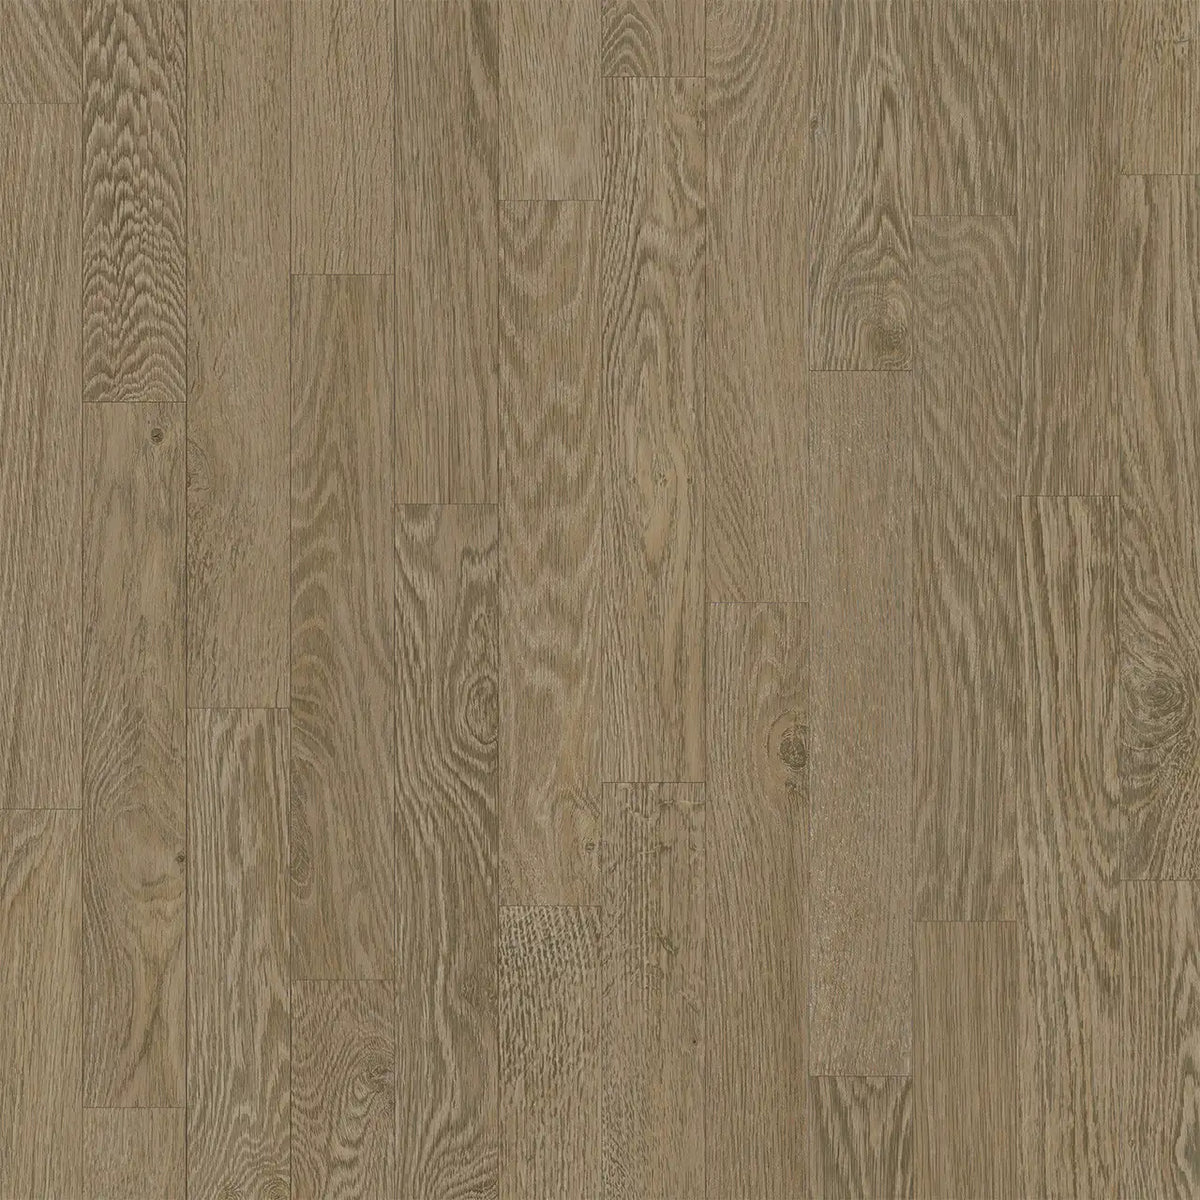 Engineered Floors - Atmosphere Collection - 7 in. x 48 in. - Dreamland